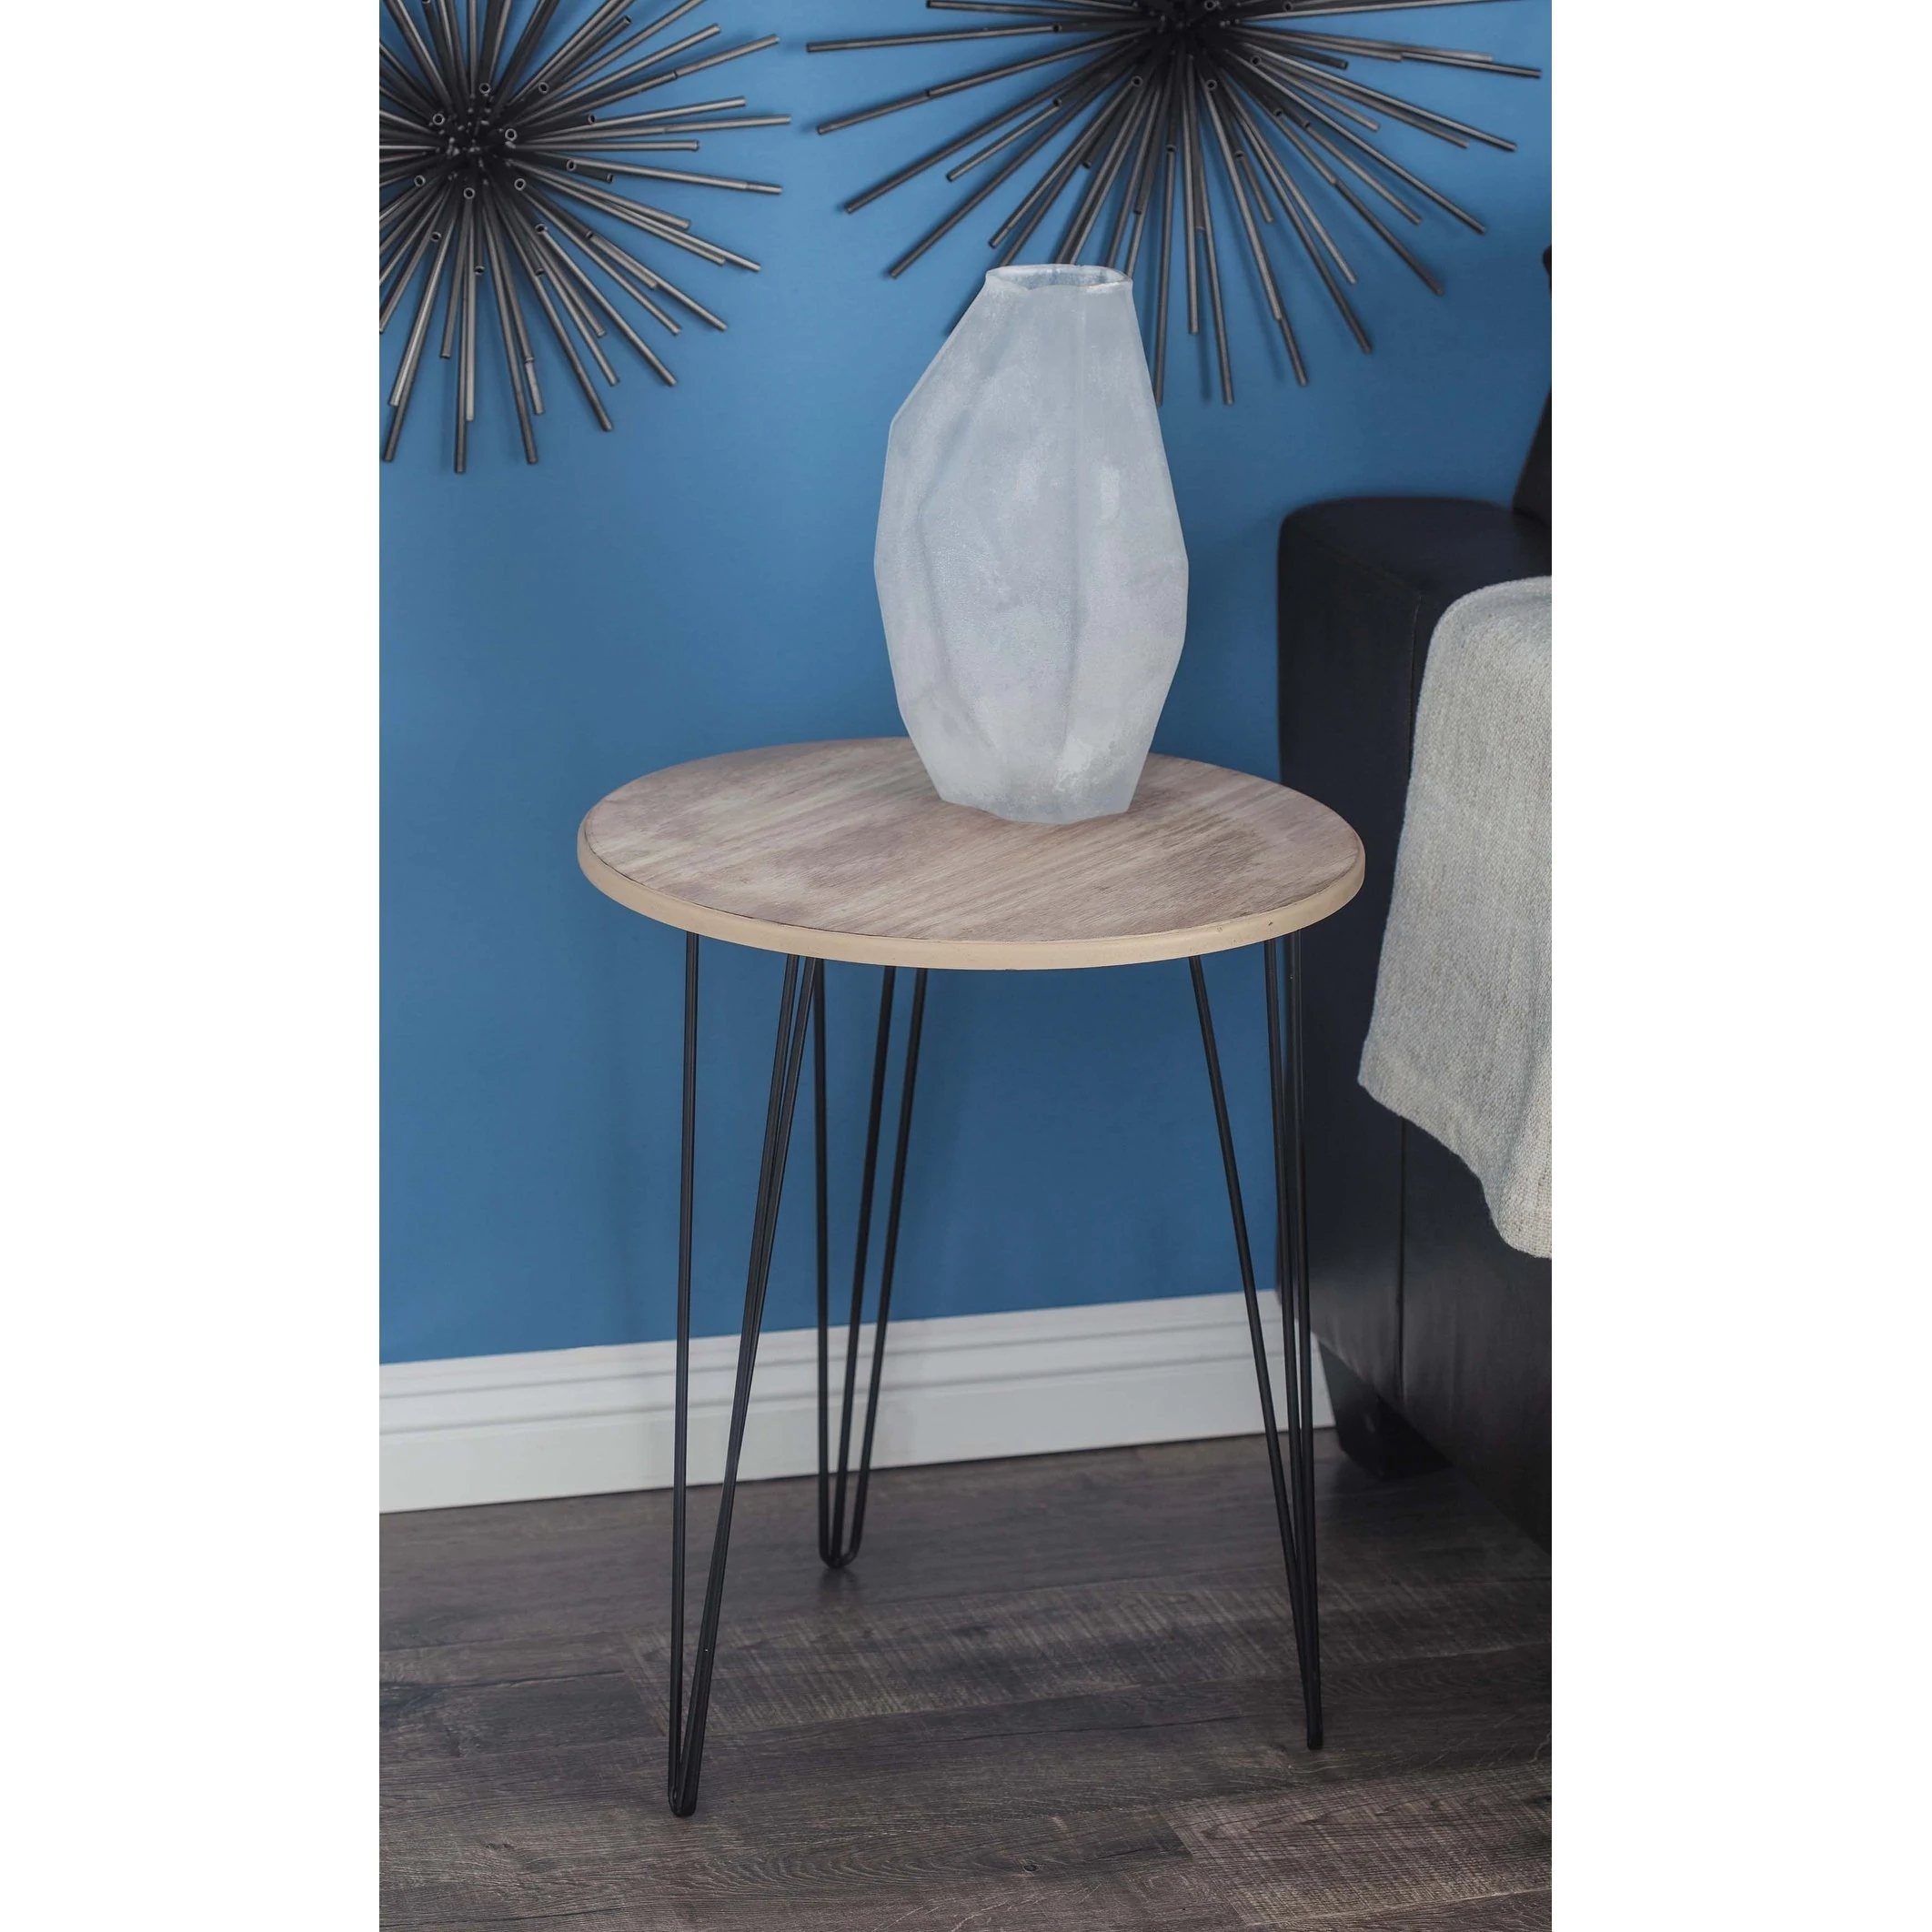 modern inch round wood and iron accent table studio free shipping today rustic coffee black oval floor separator pottery barn bar high bedside broyhill side with usb decorative